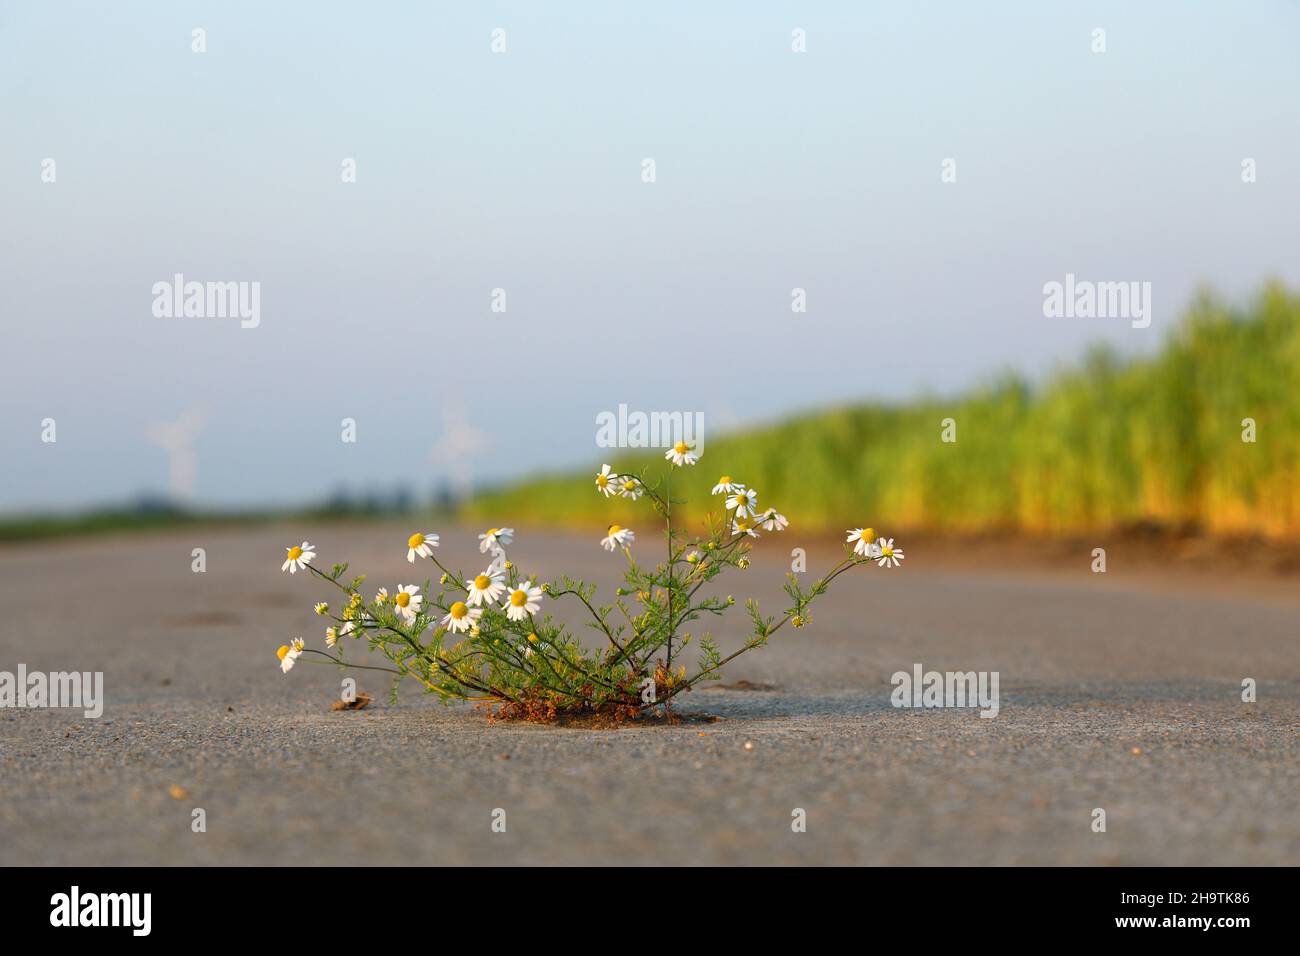 corn chamomile (Anthemis arvensis), blooming on a path, Netherlands, Groningen Stock Photo